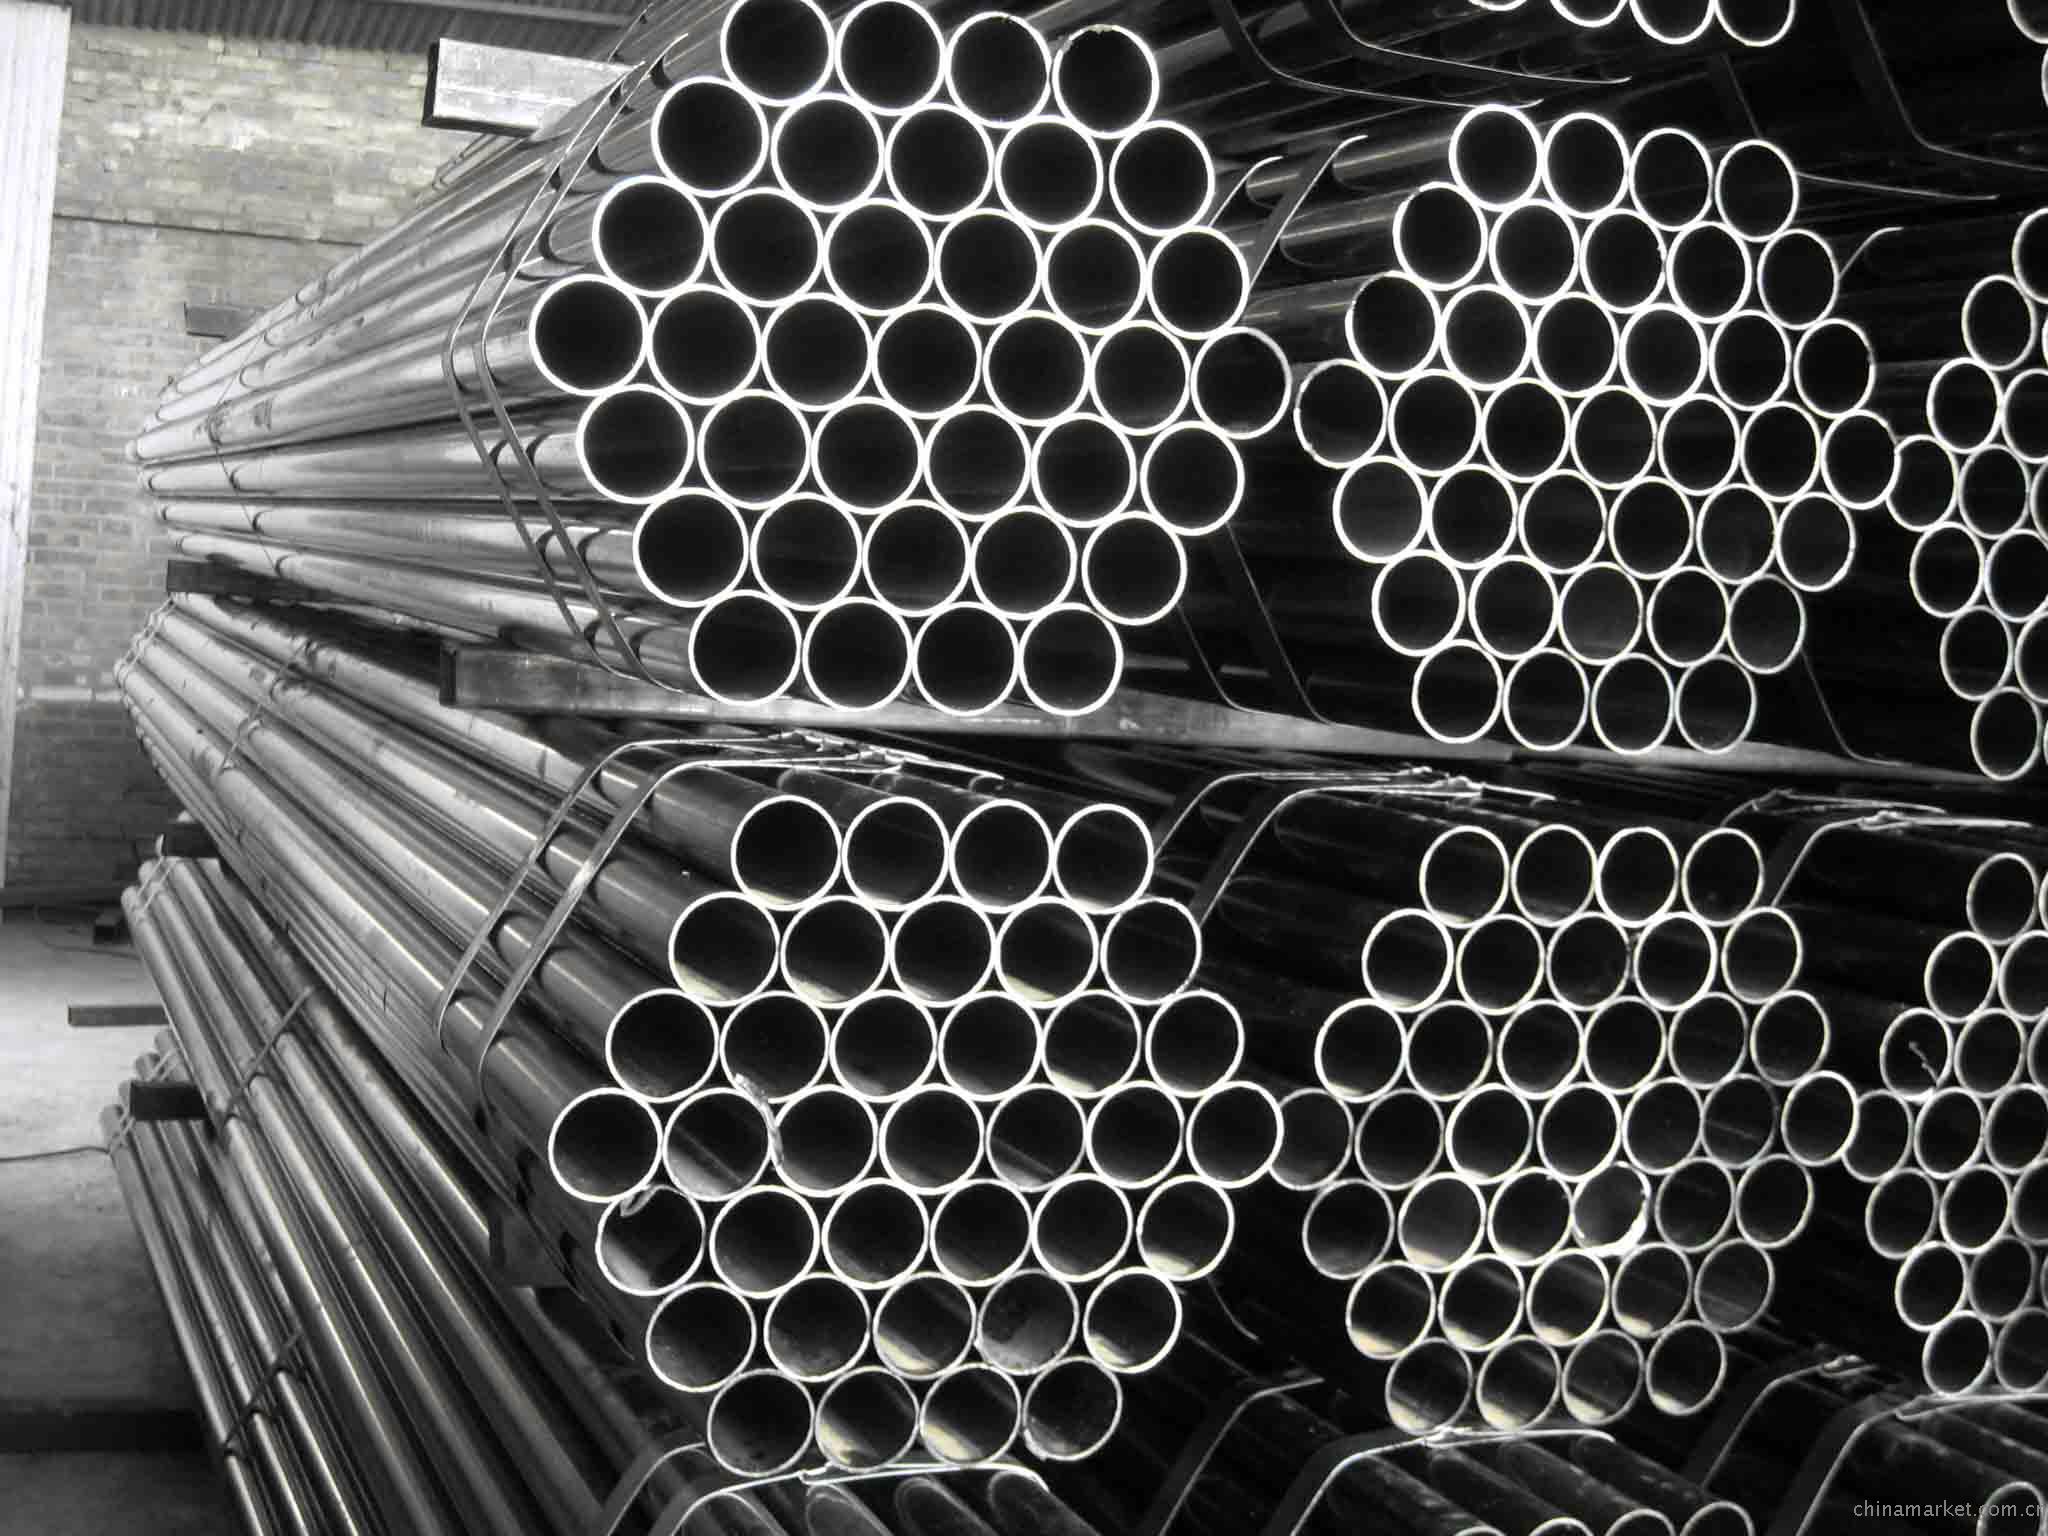 Annual Demand for Steel Pipes, Profiles | Financial Tribune